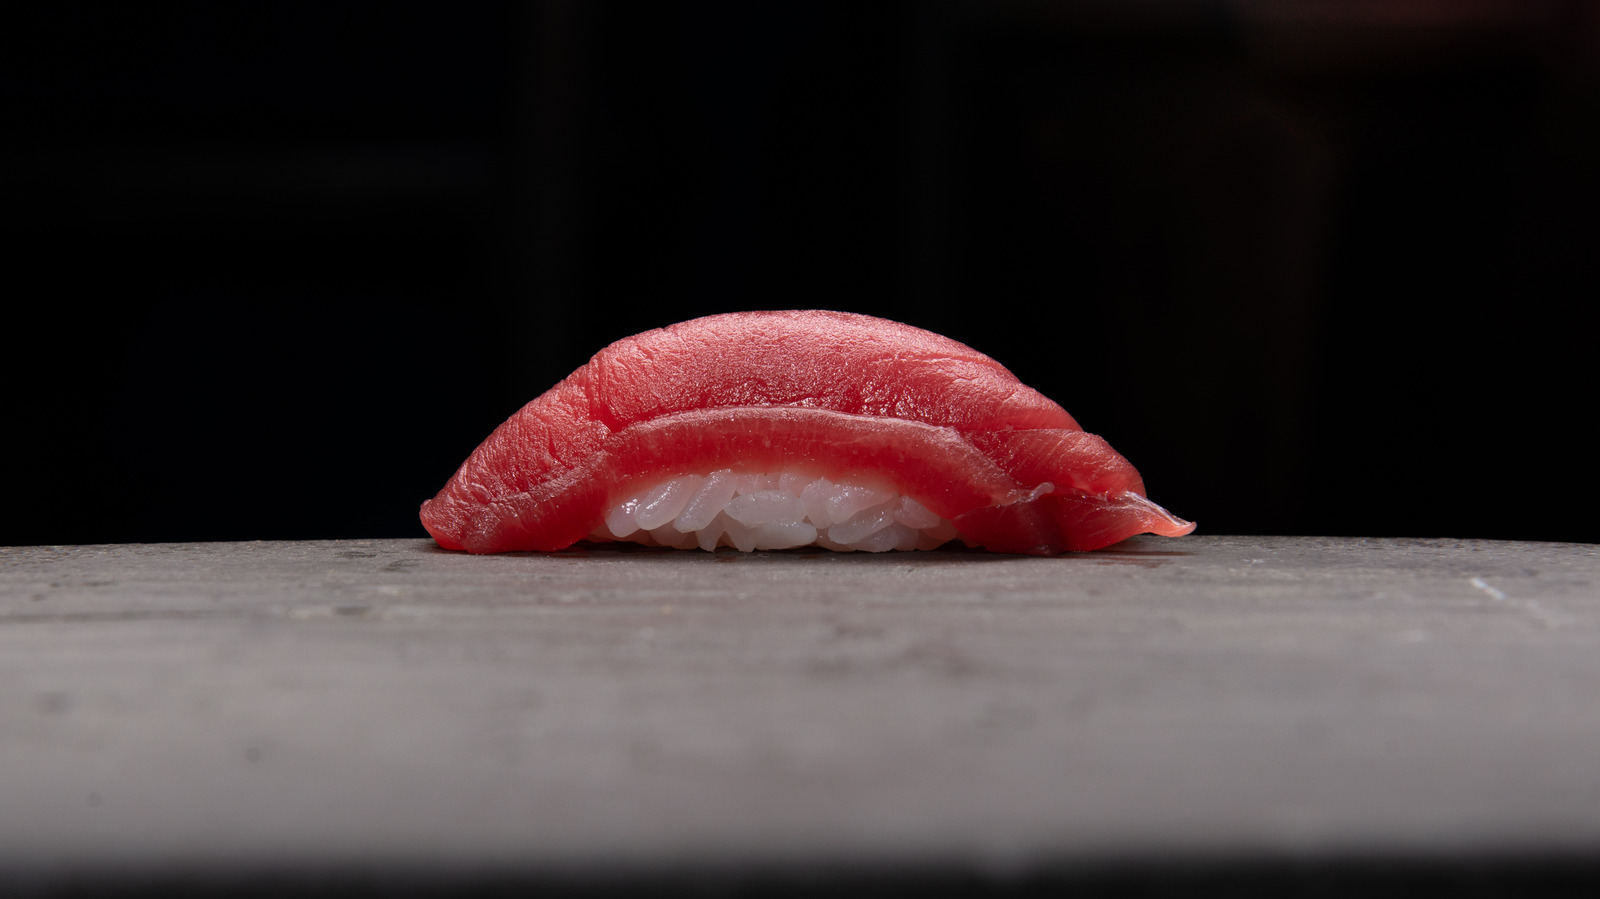 https://www.tastingtable.com/img/gallery/everything-you-need-to-know-about-maguro/l-intro-1666553556.jpg